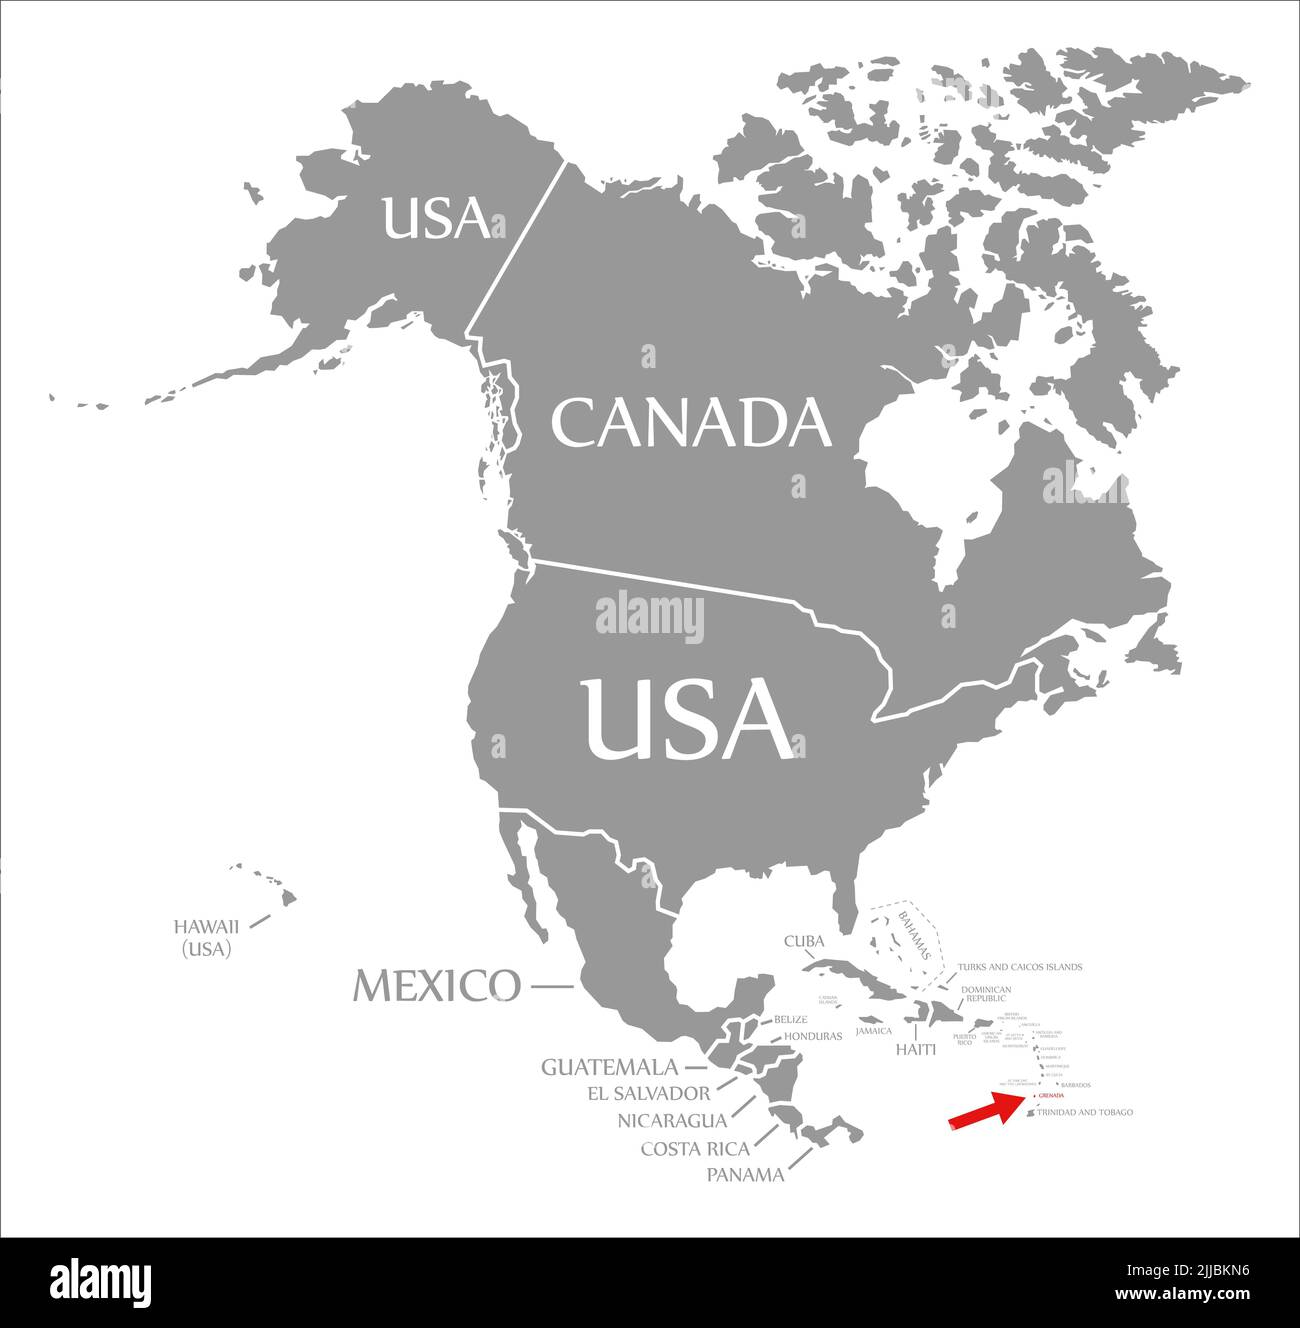 Grenada red highlighted in map of North America Stock Photo